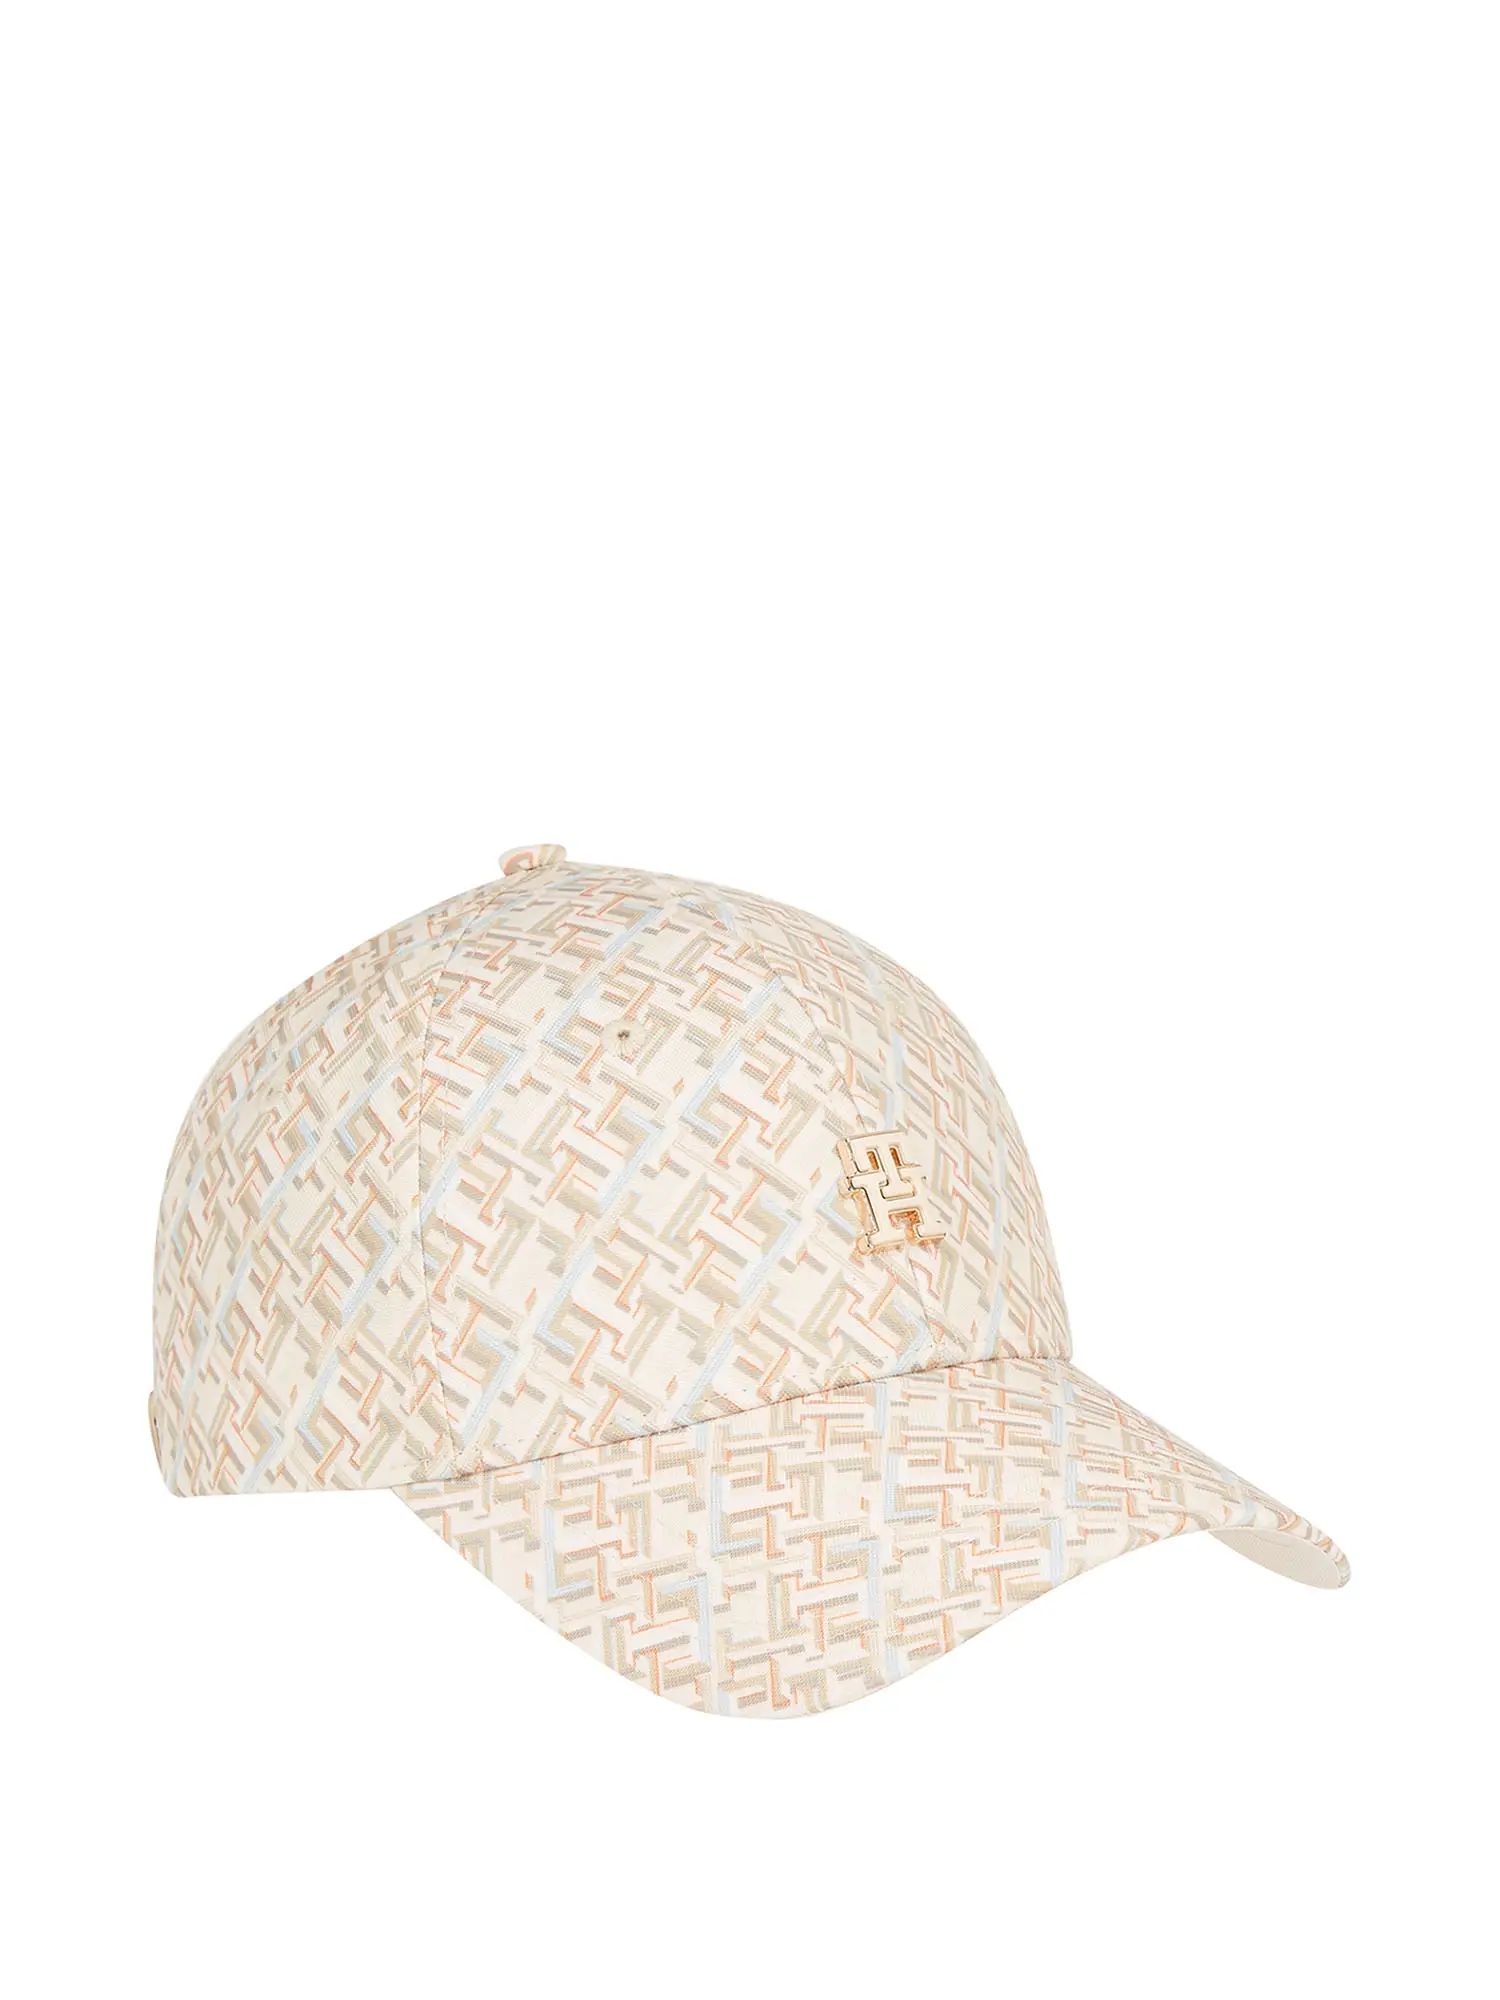 CAPPELLO DONNA - TOMMY HILFIGER - AW0AW16047 - BIANCO, UNICA